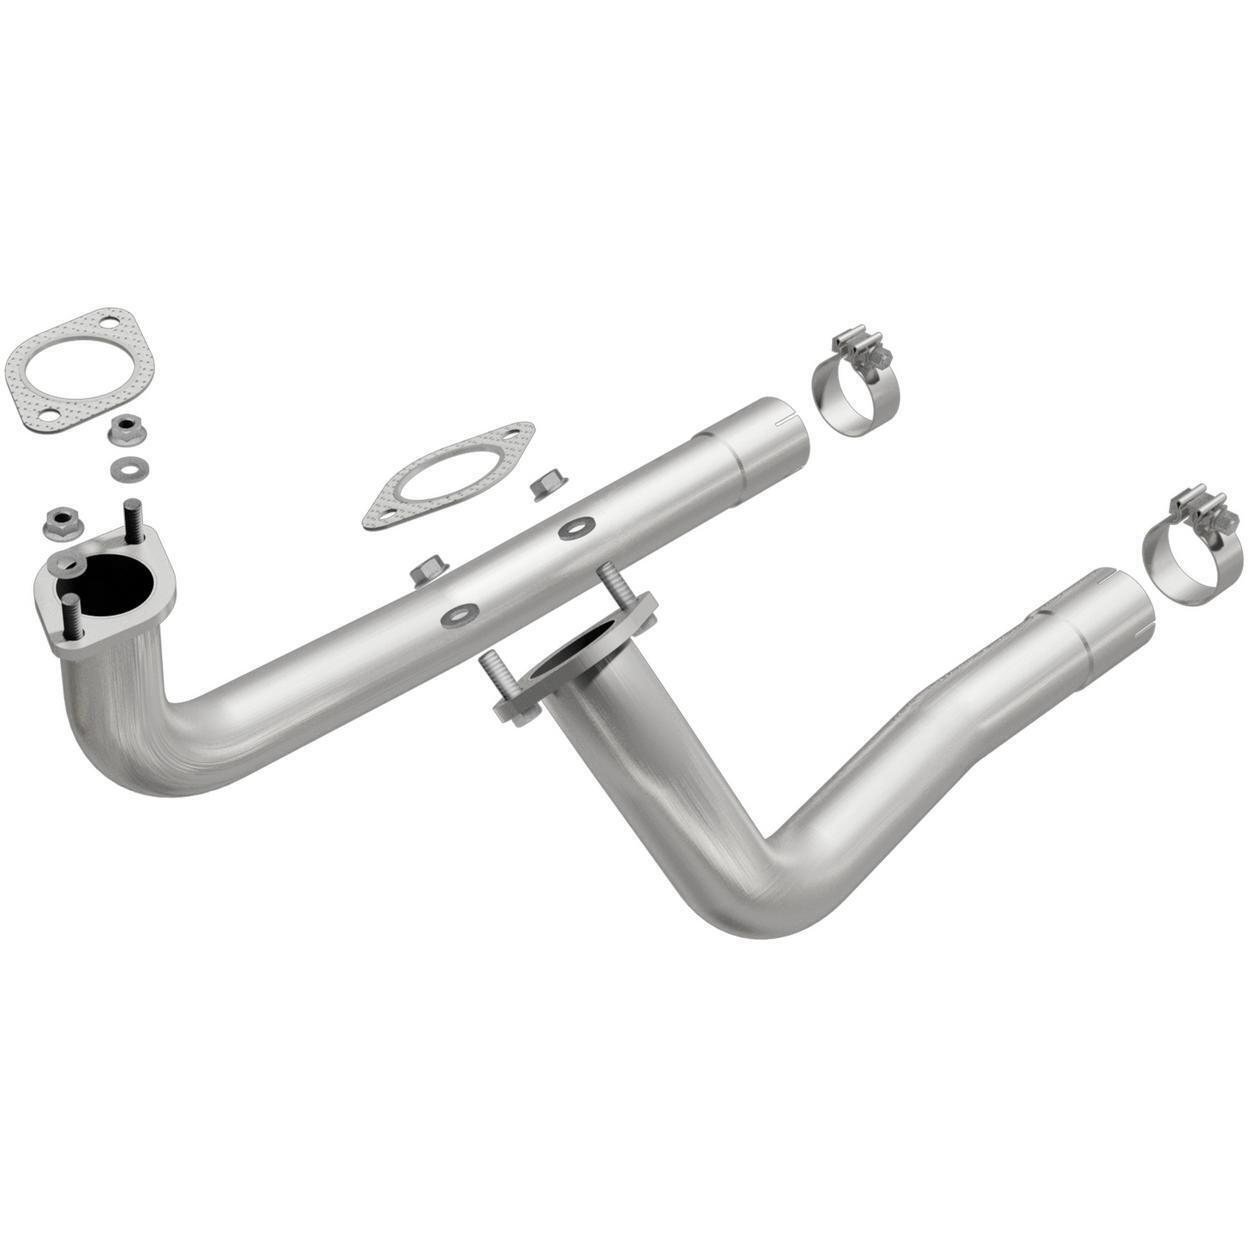 MagnaFlow 19304-MU for 1963-1964 Plymouth Fury 6.3L V8 GAS OHV